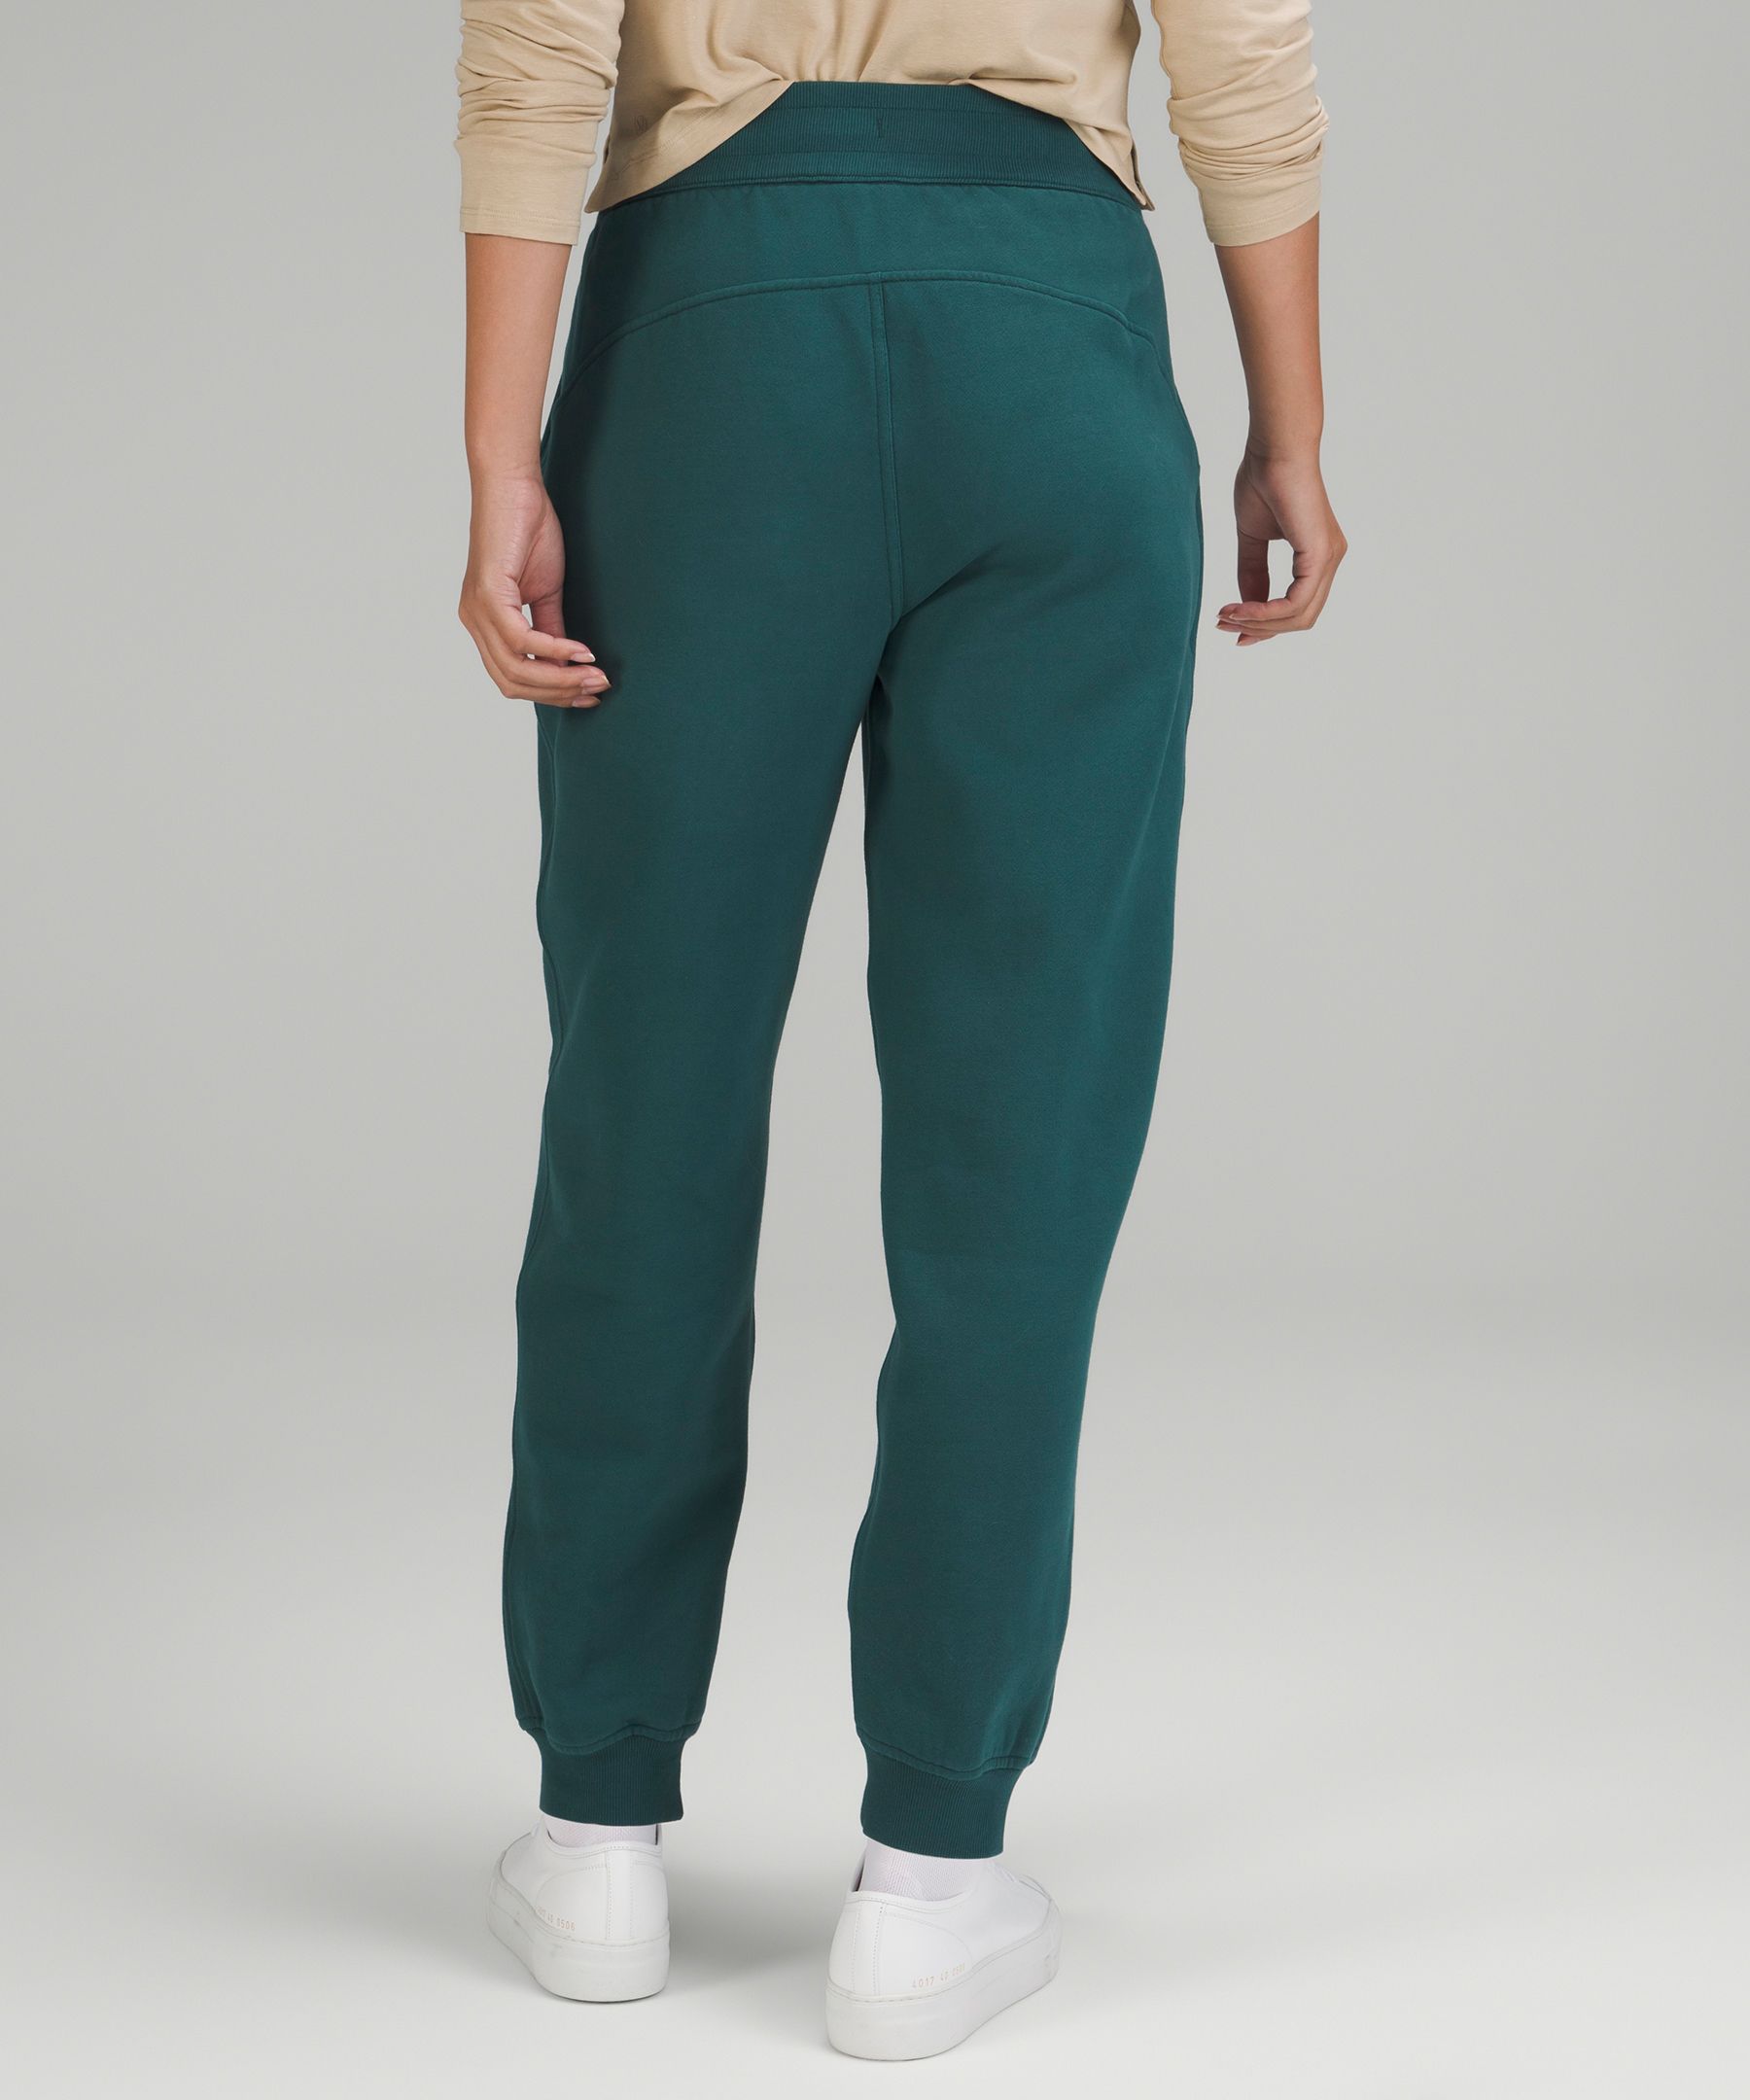 Need help sizing for scuba high rise joggers plz!!🥲I am a size 6